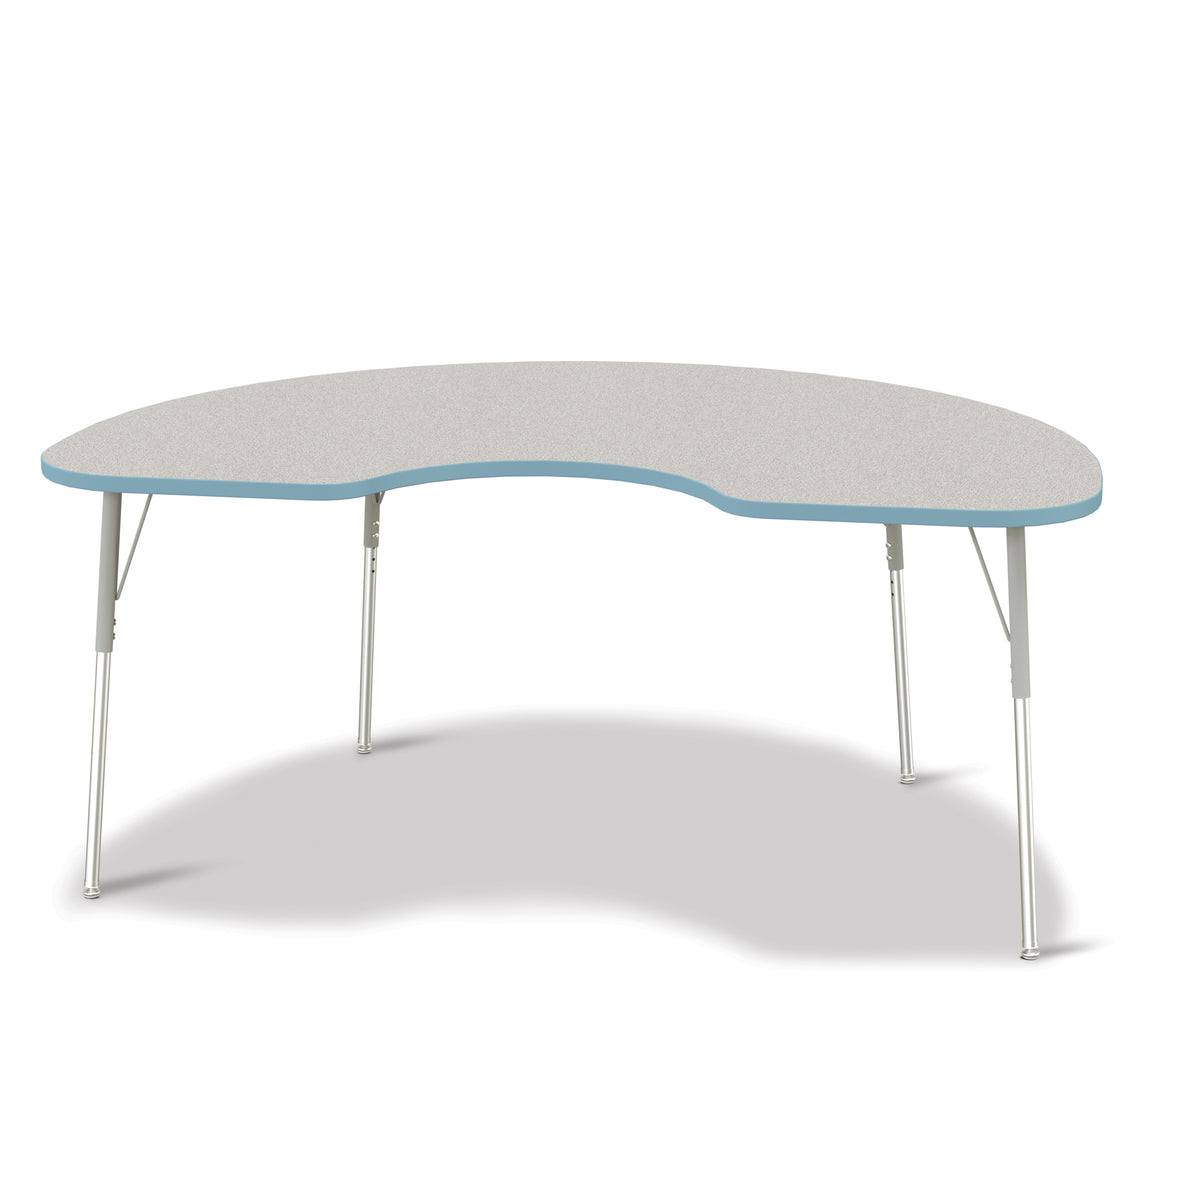 6423JCA131, Berries Kidney Activity Table - 48" X 72", A-height - Freckled Gray/Coastal Blue/Gray